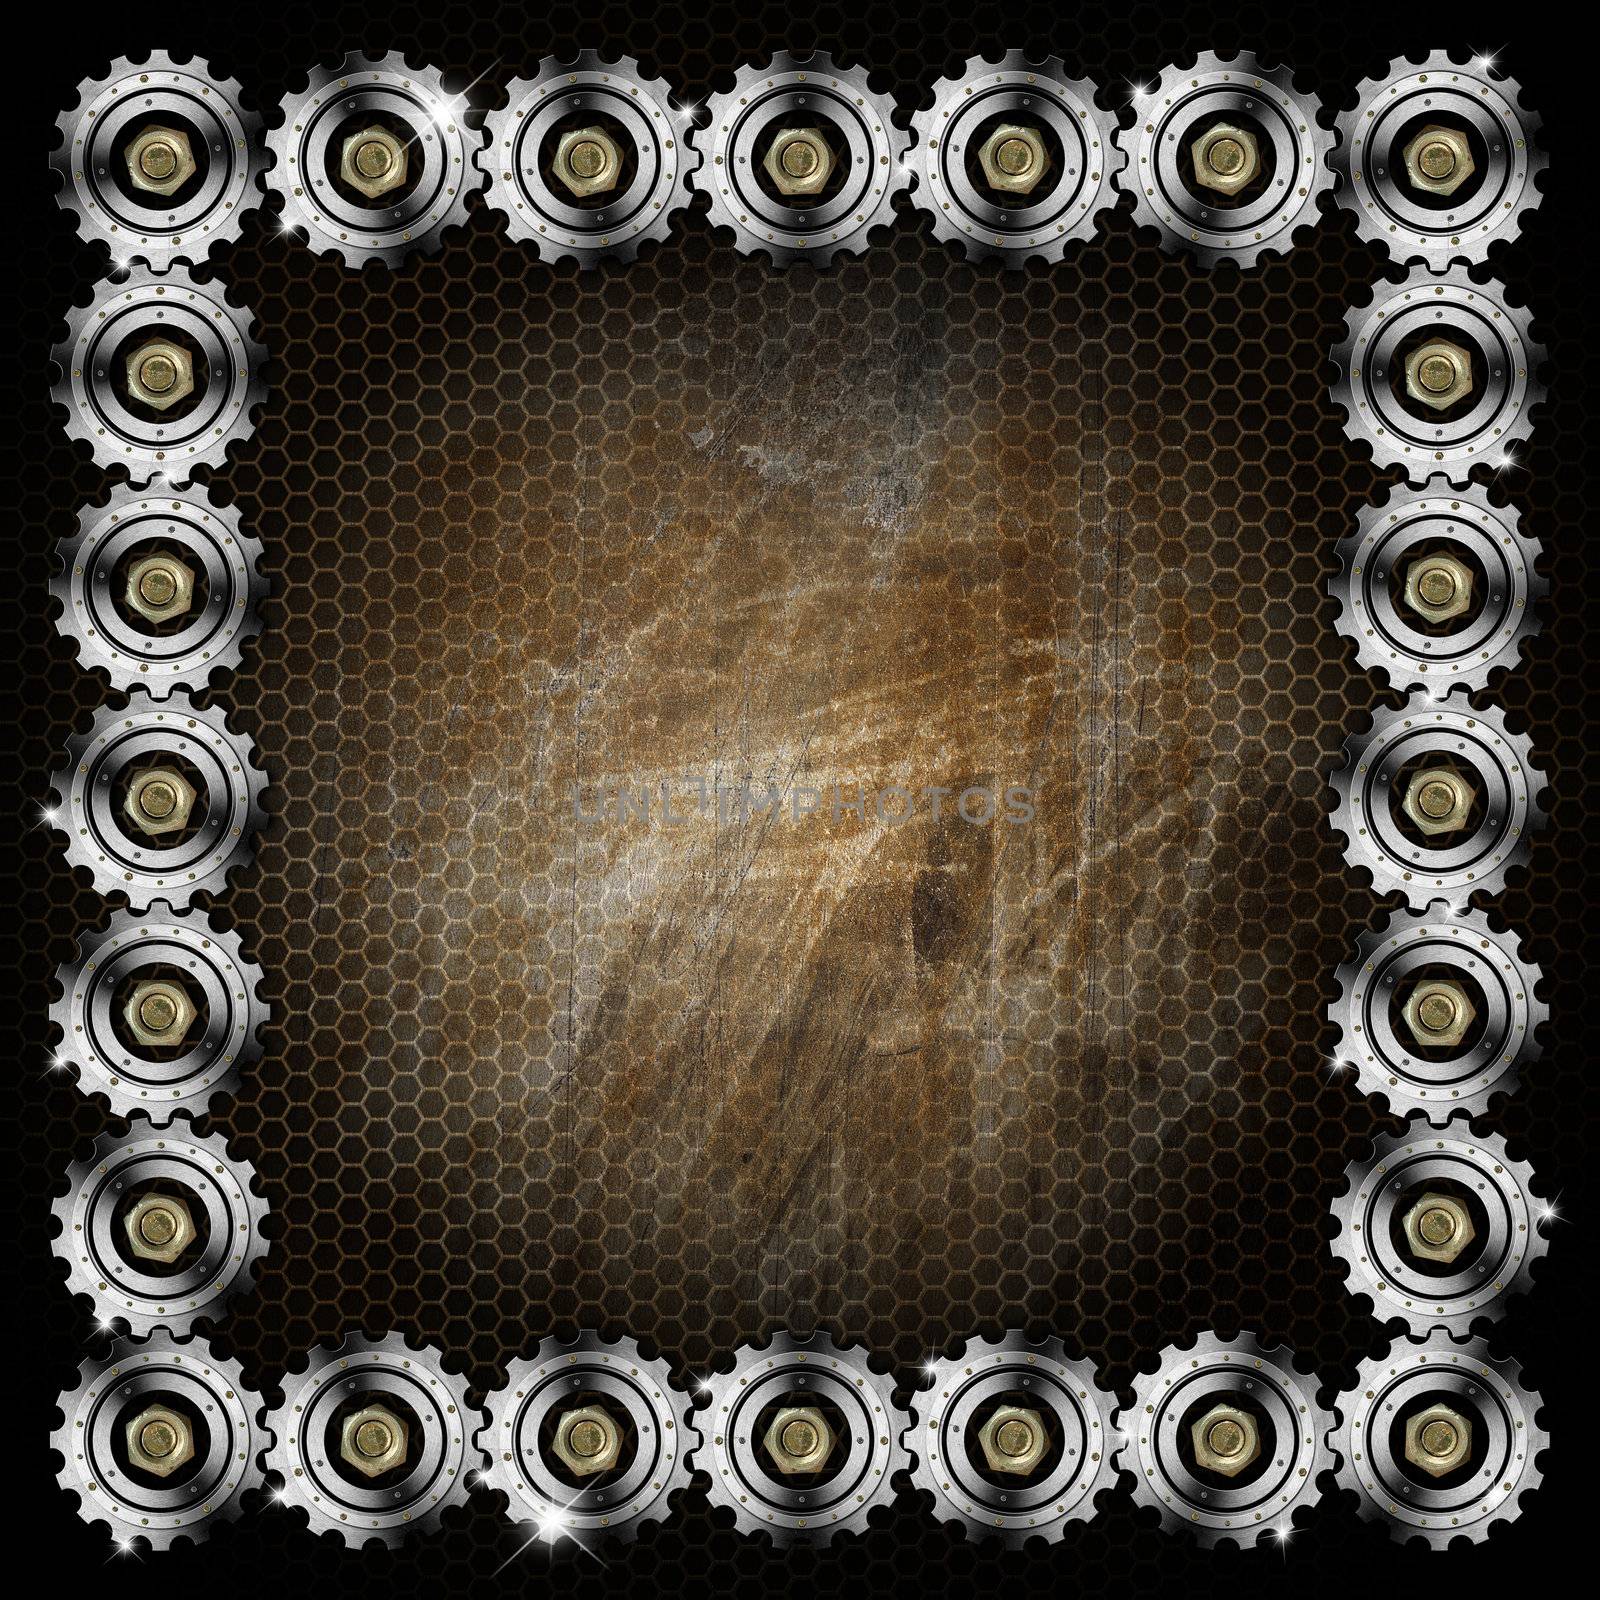 Metallic and brown template background with metal gears
